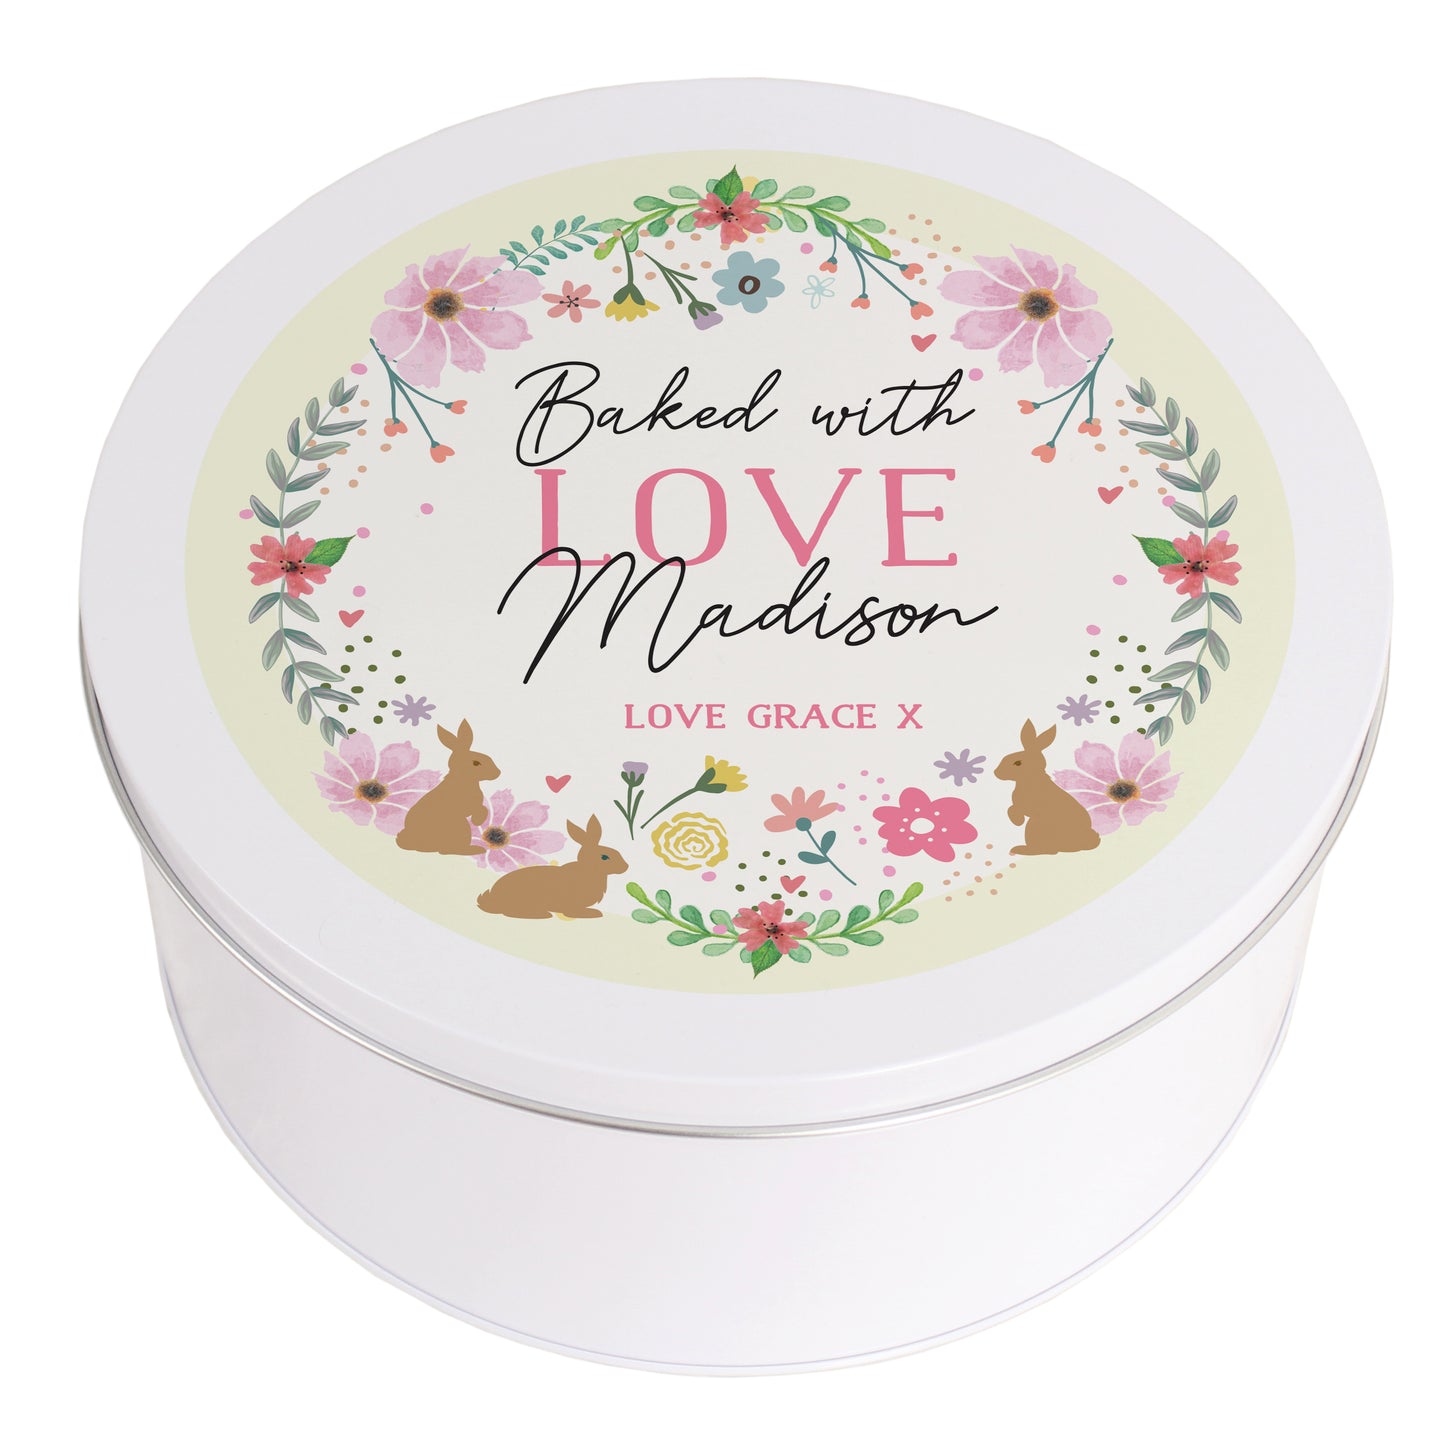 Personalised Floral Cake Tin that says "Bake with LOVE Madison LOVE GRACE X"